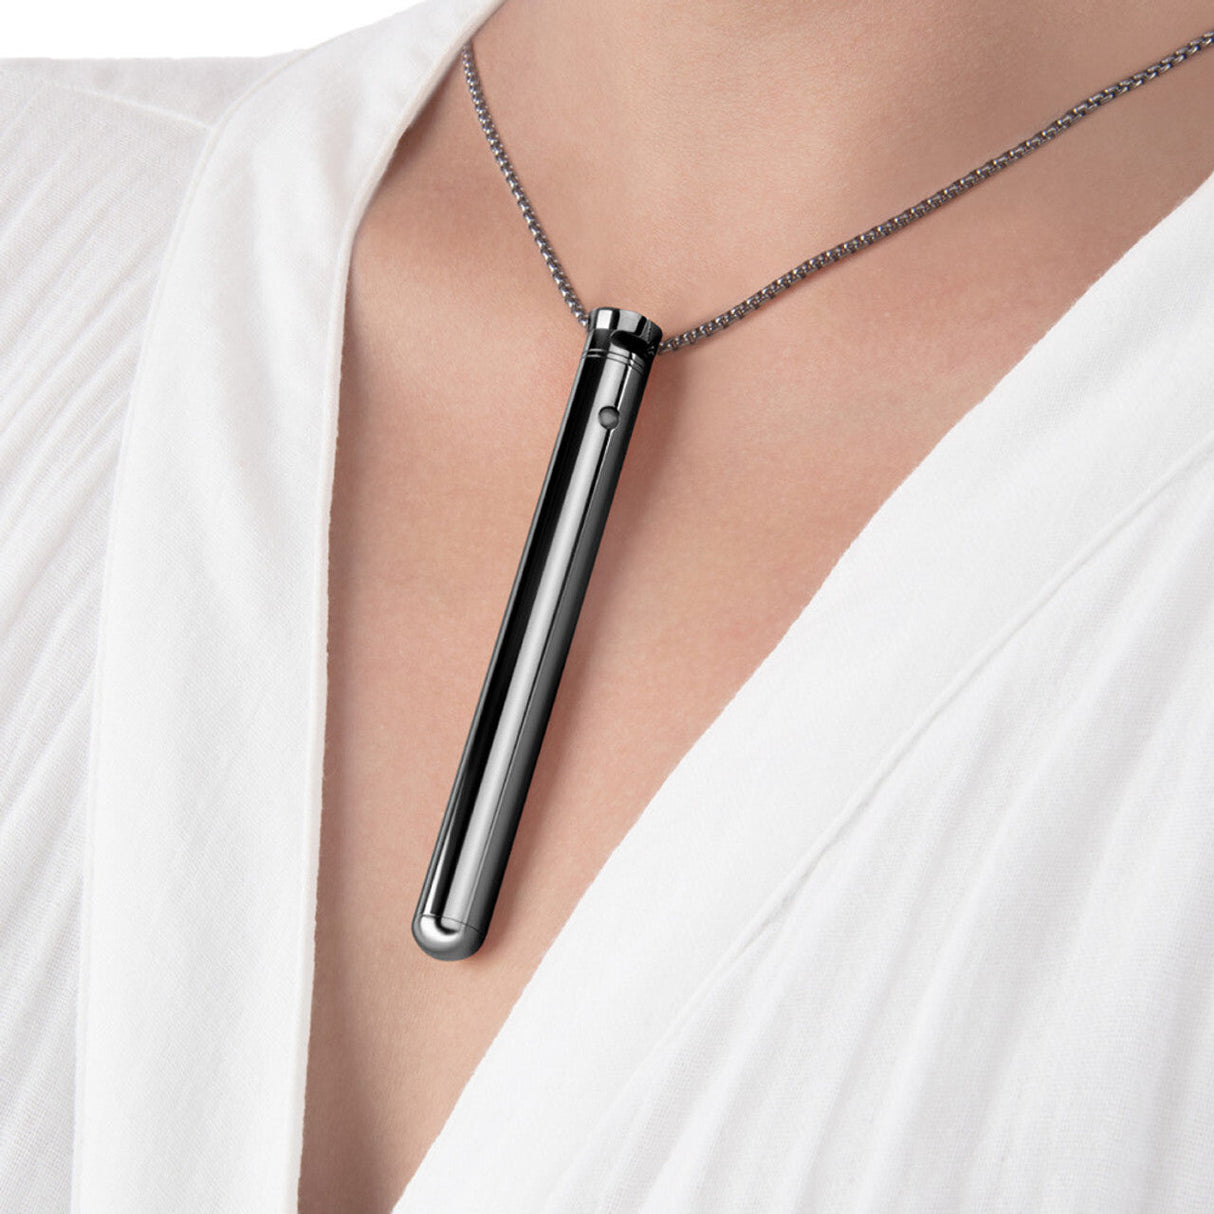 Le Wand Rechargeable Necklace Vibrator